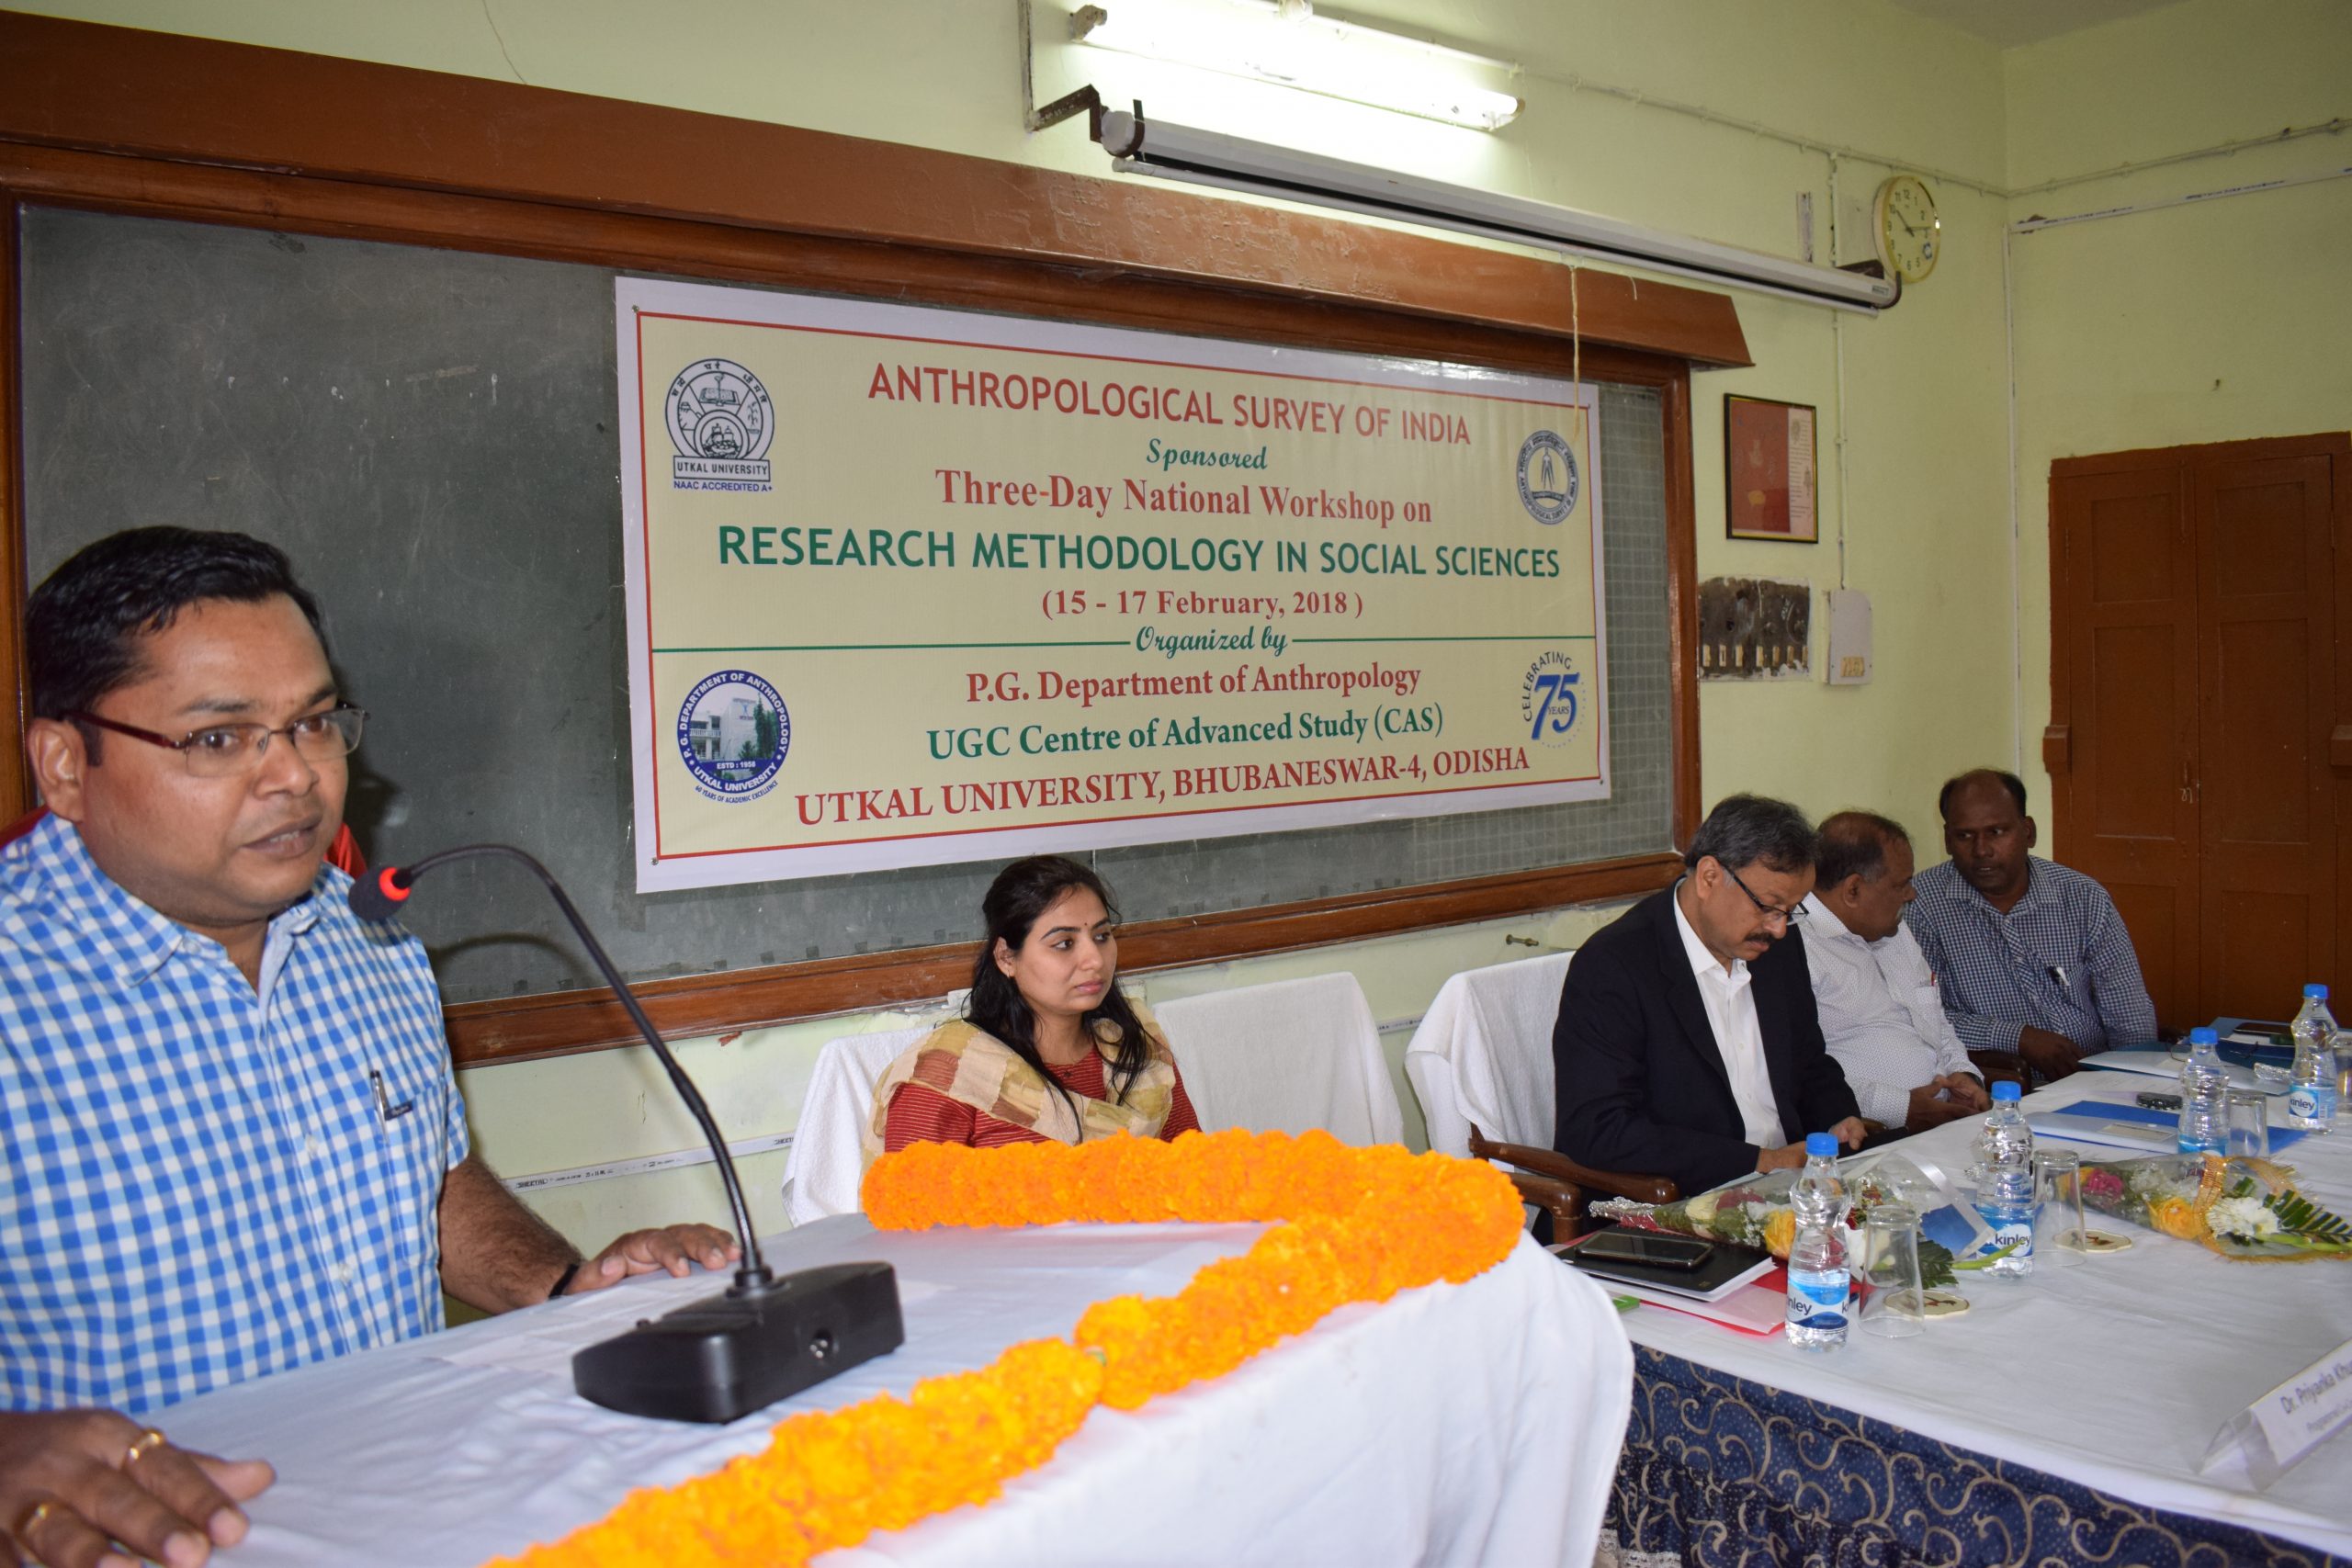 National Workshop on Research Methodology in Social Science in Collaboration with AnSI Govt of India